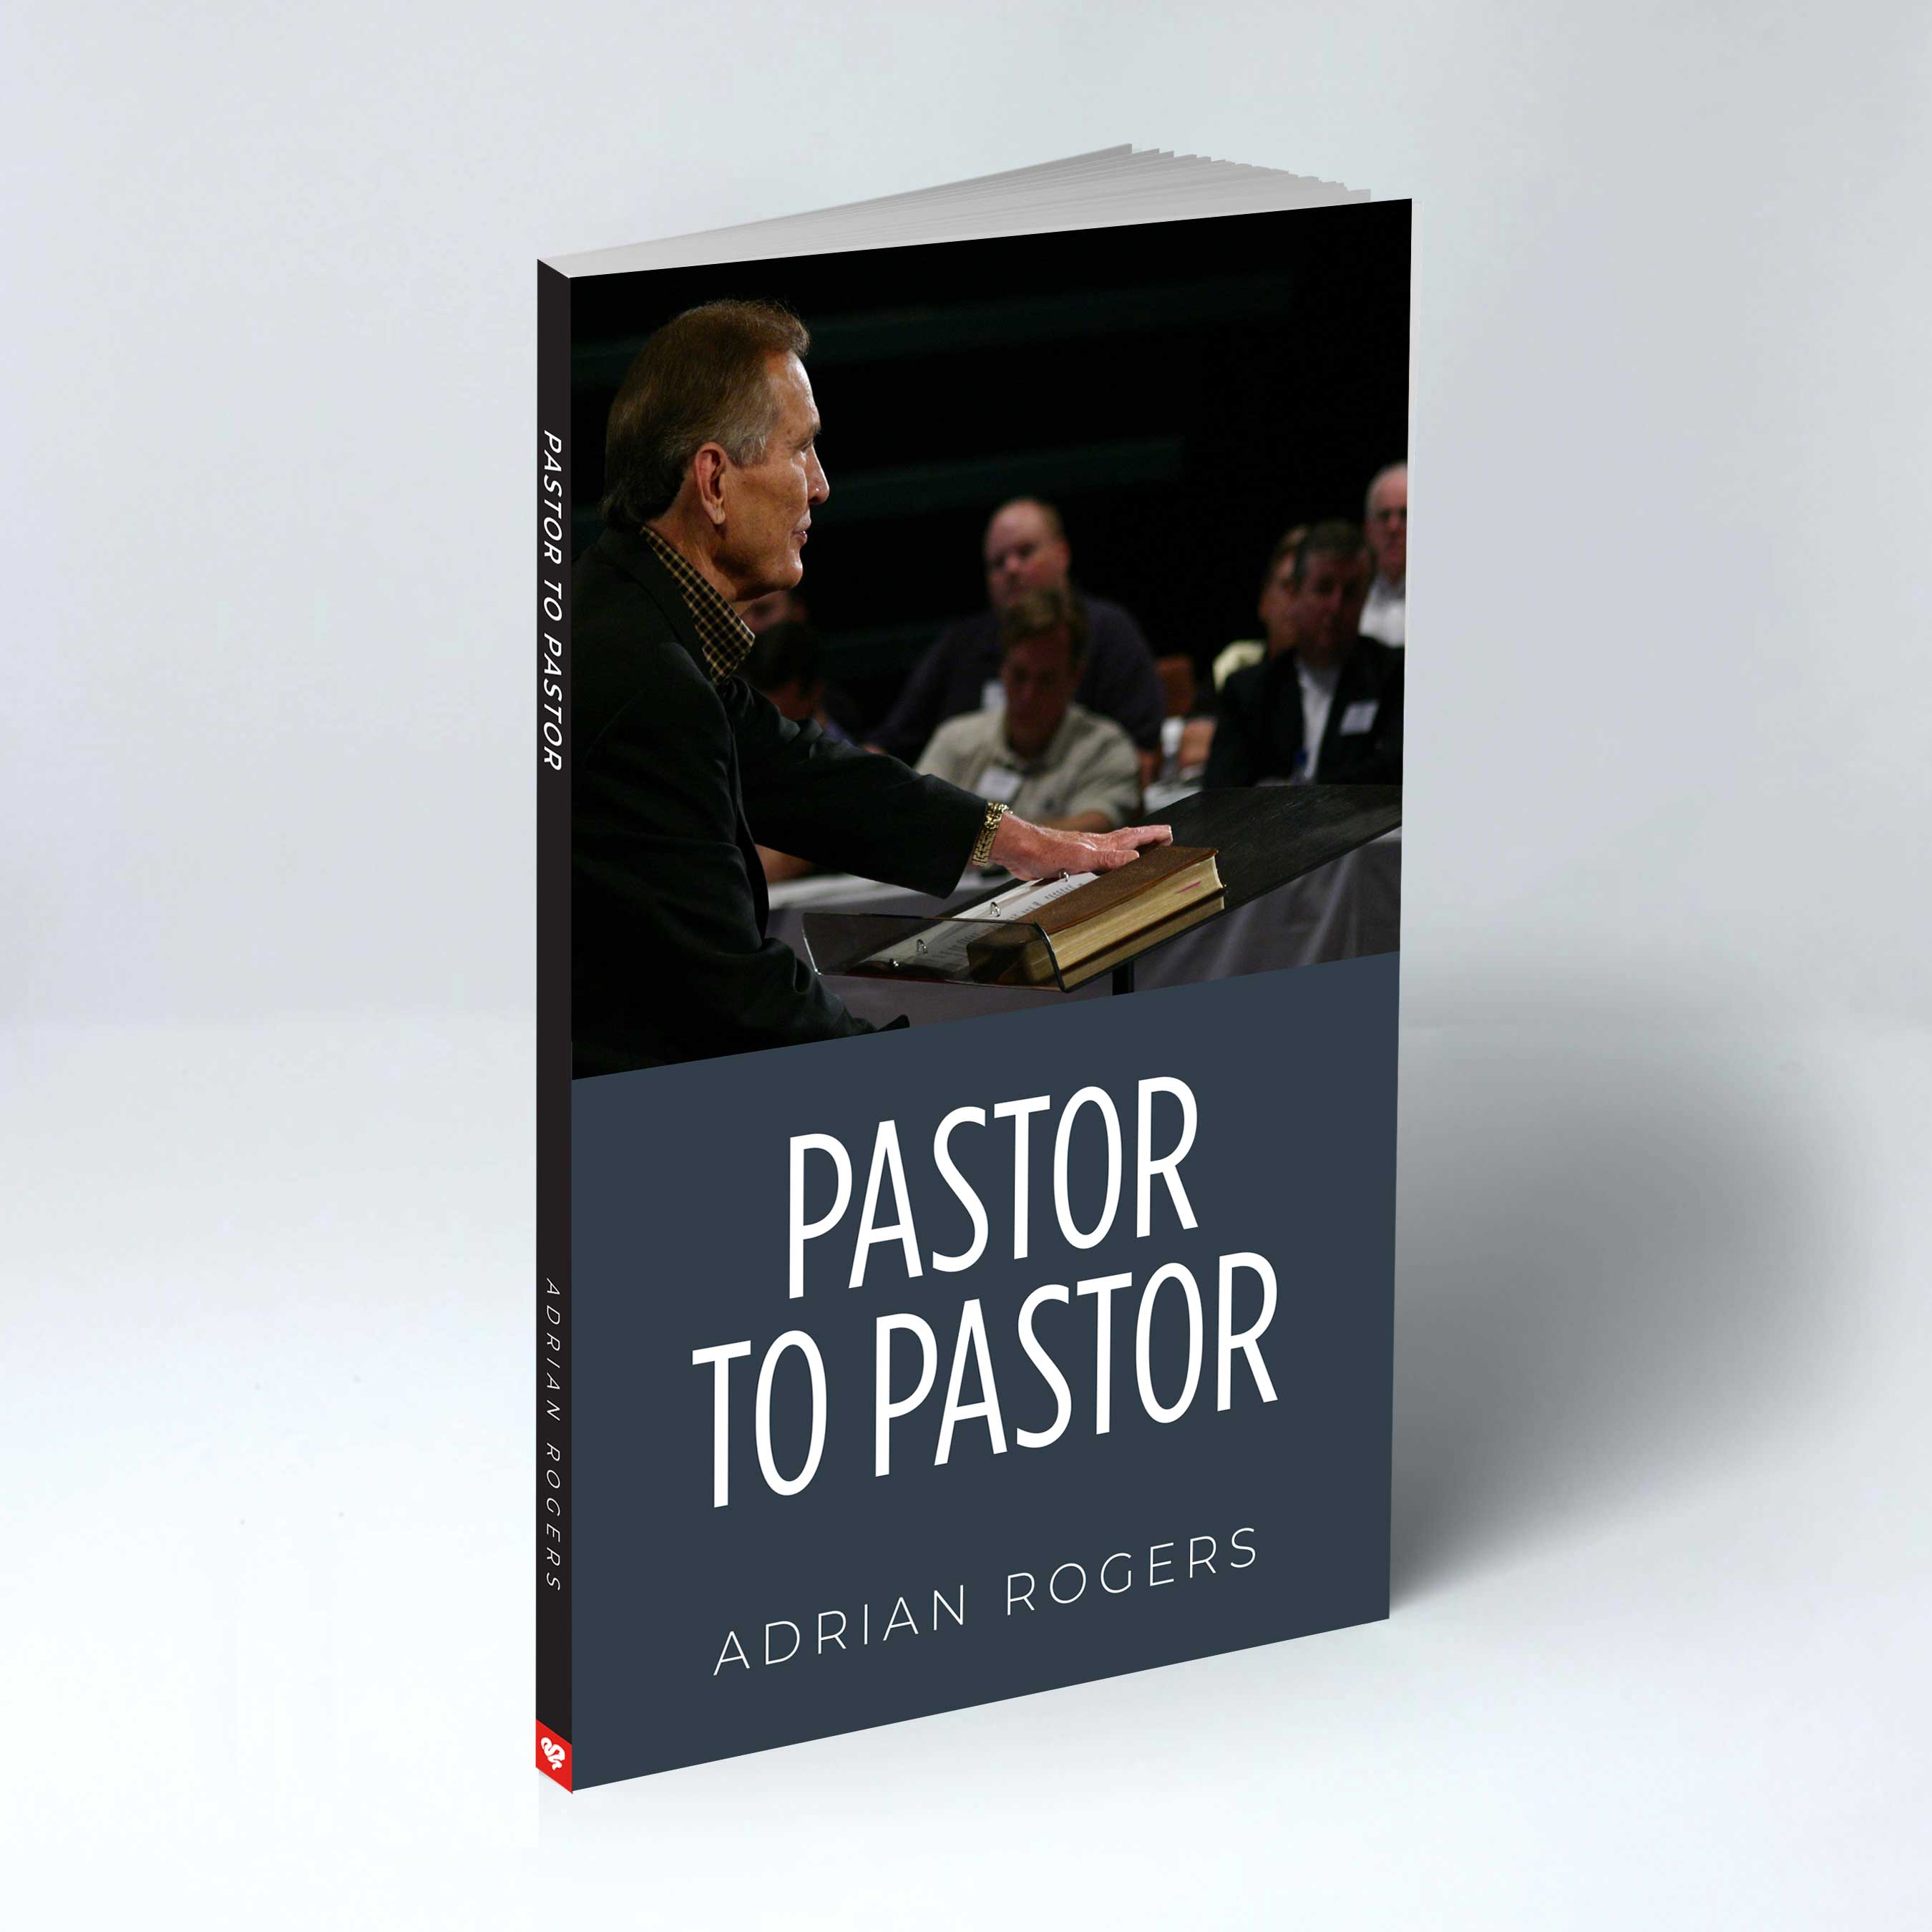 Pastor to Pastor book